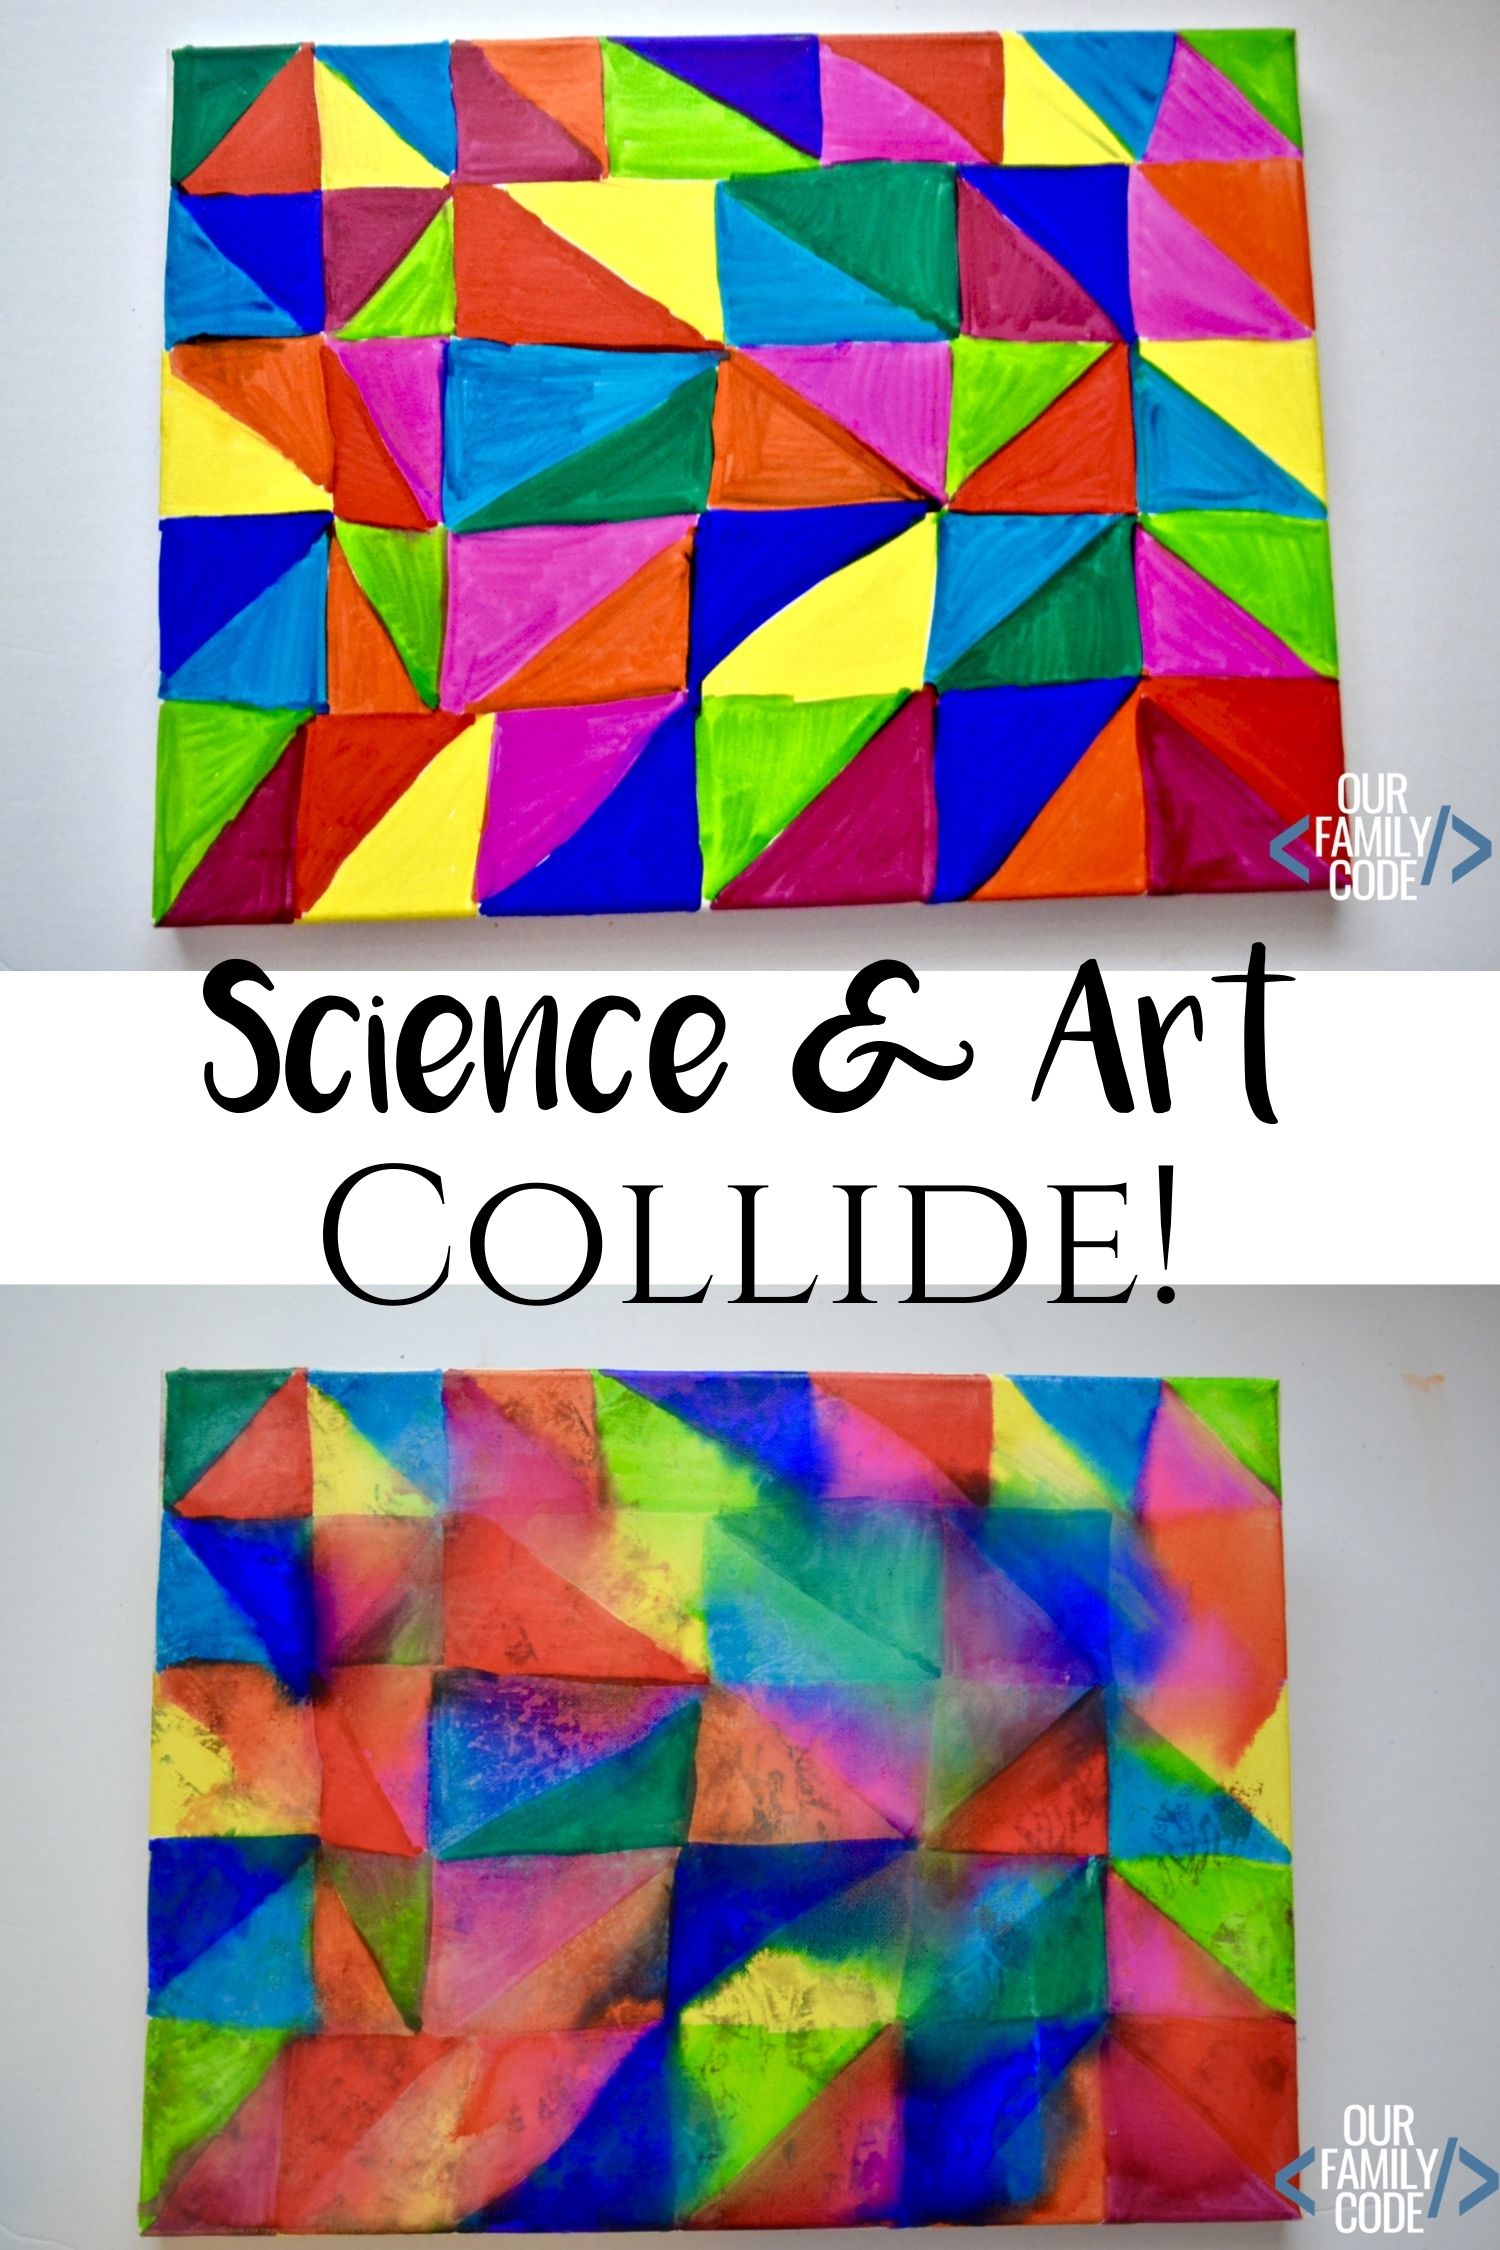 Learn about solubility, color mixing, and diffusion with Sharpie art on a canvas! #STEAMactivities #artprojectsforkids #kidcrafts #STEM #STEAM #STEAMkids #scienceactivitiesforkids #sharpieart